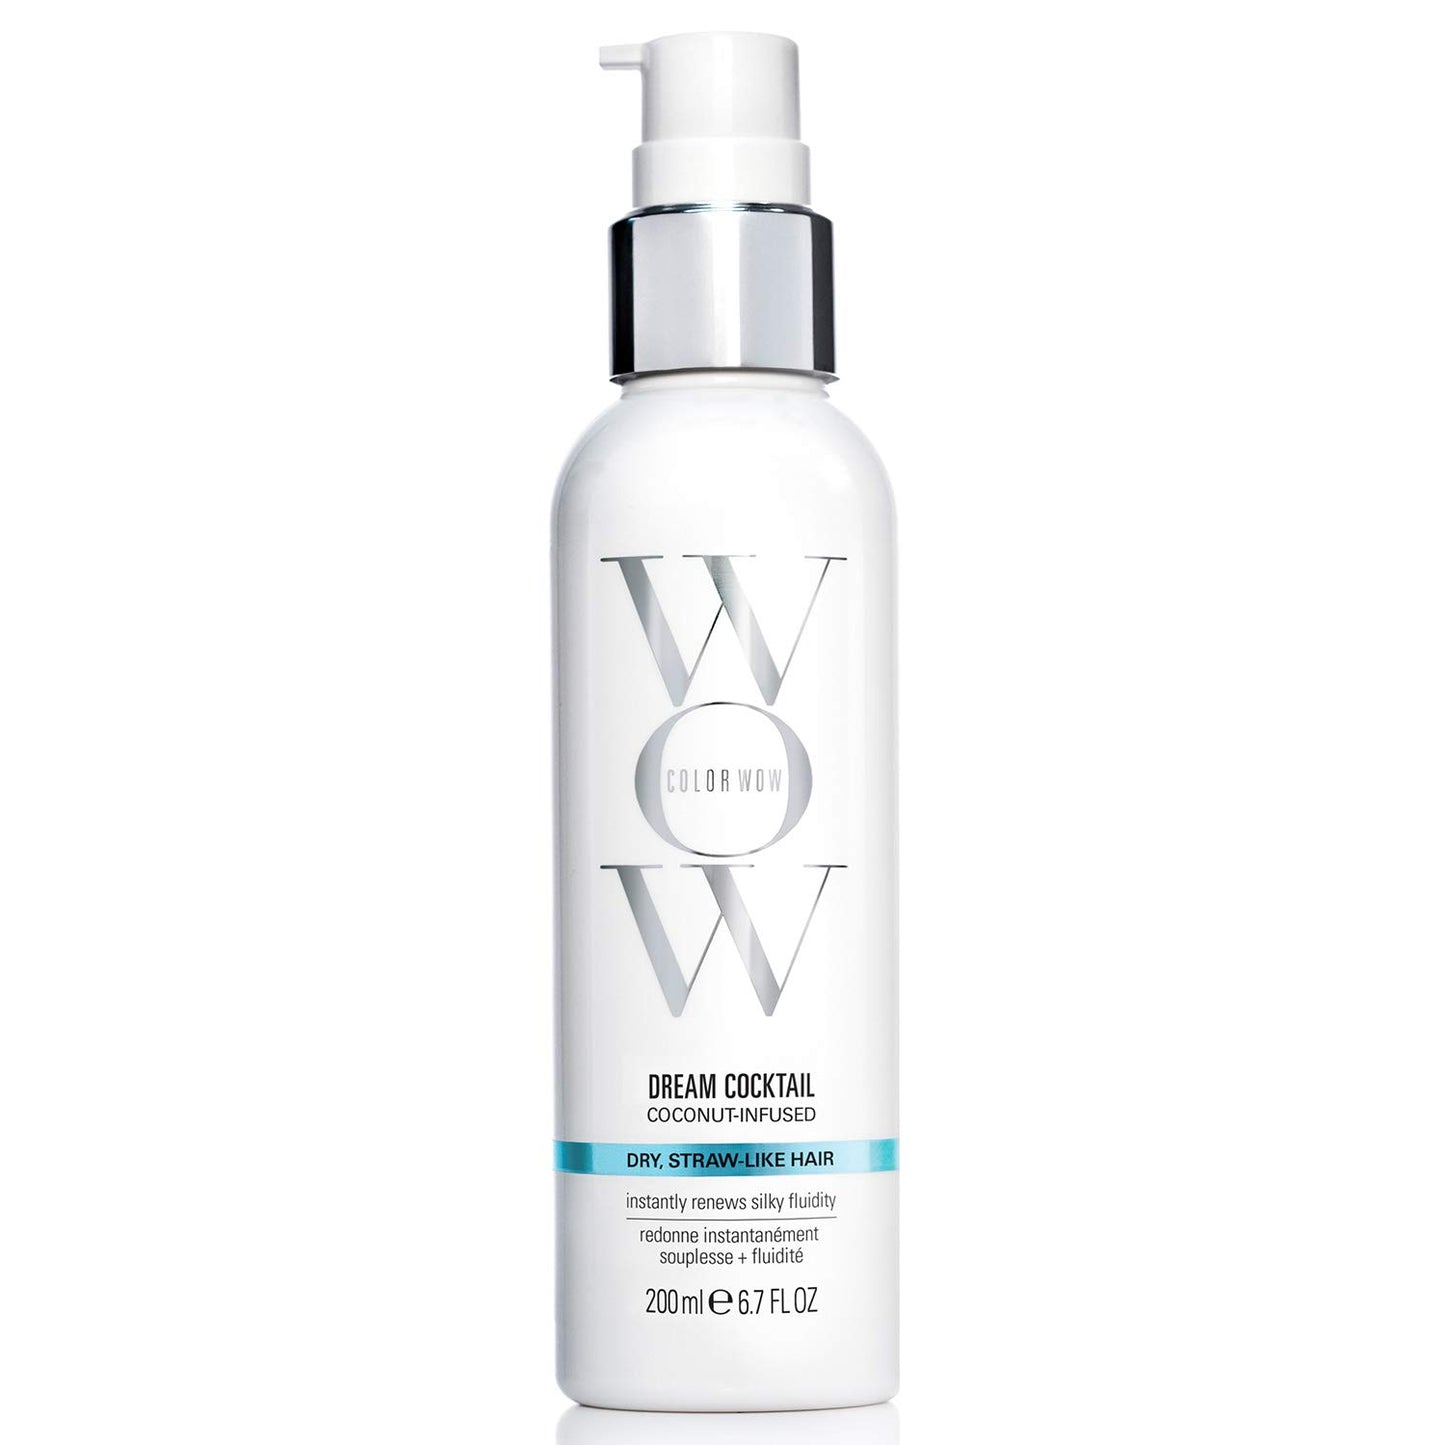 COLOR WOW Dream Cocktail Leave In Treatment Hair, COCONUT-INFUSED 6 7 Fl Oz